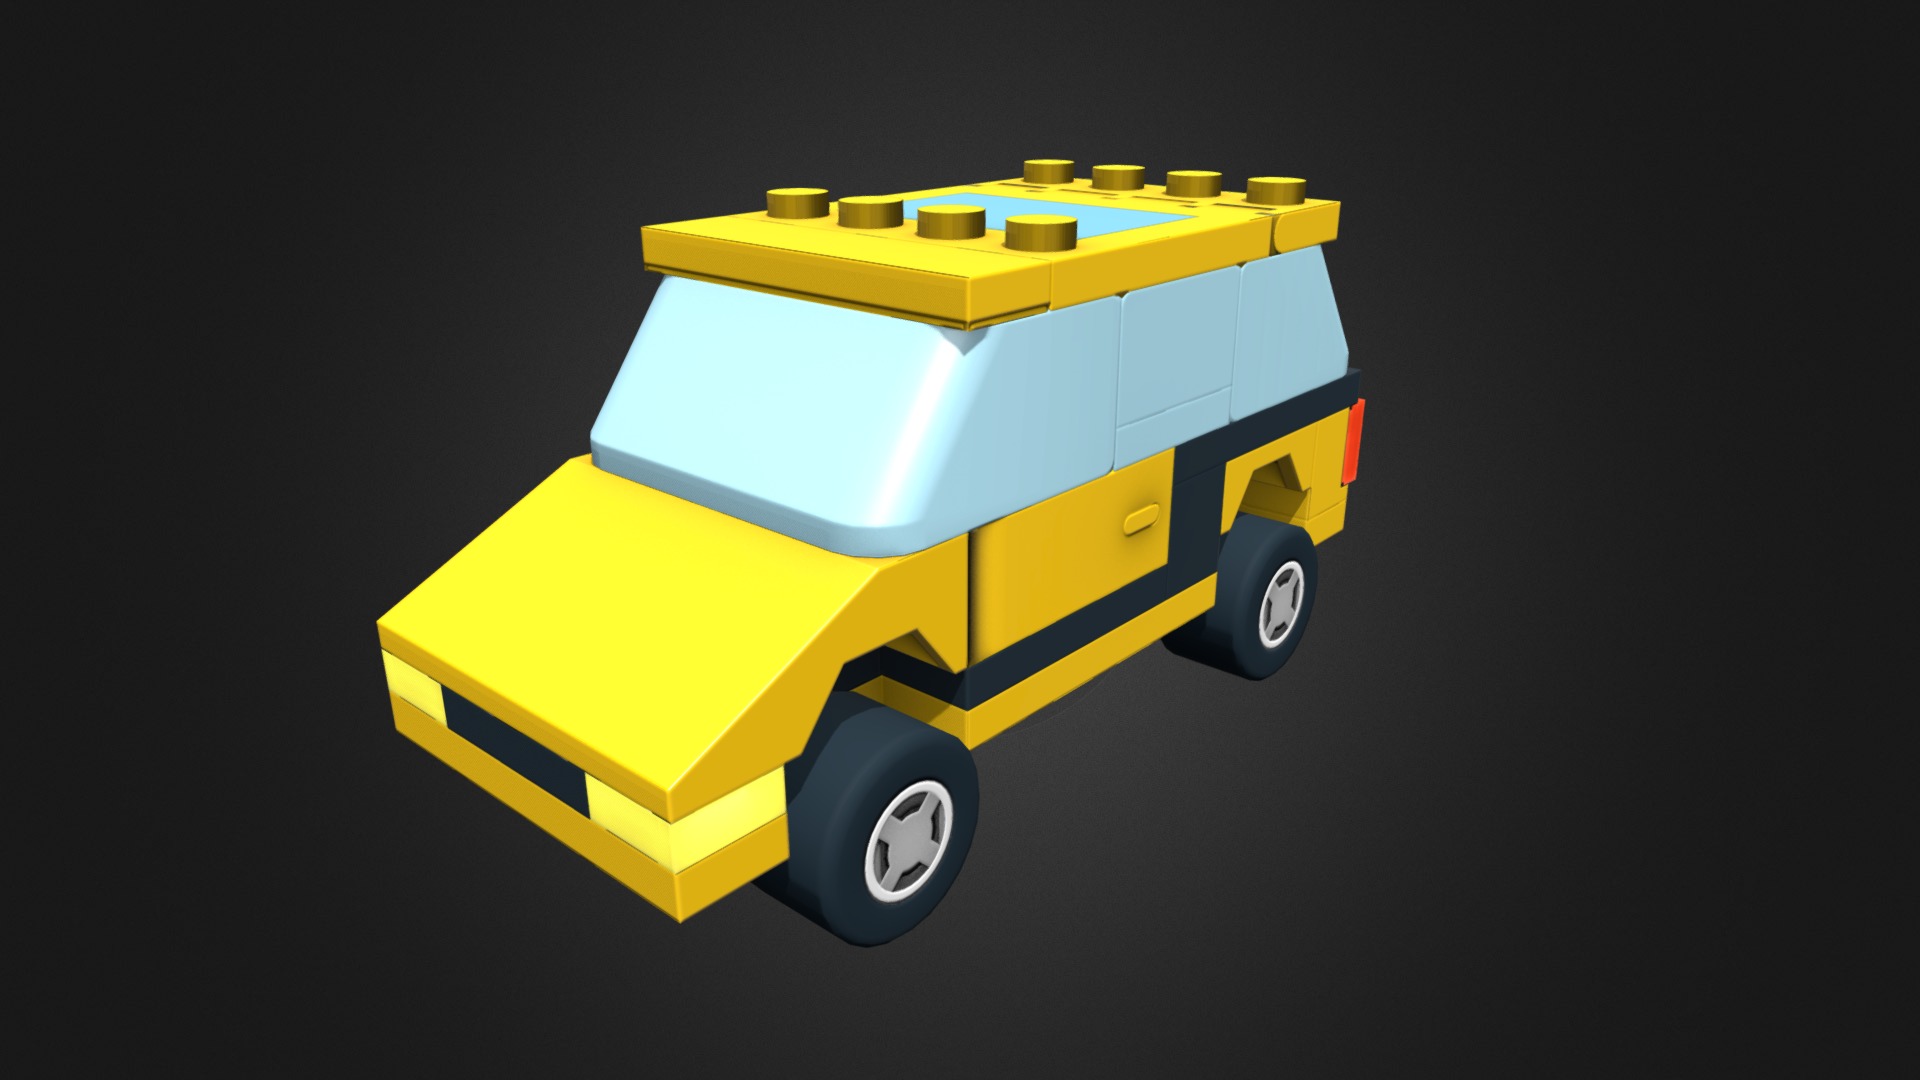 3D model 1255 Yellow Car - This is a 3D model of the 1255 Yellow Car. The 3D model is about a yellow and blue toy truck.